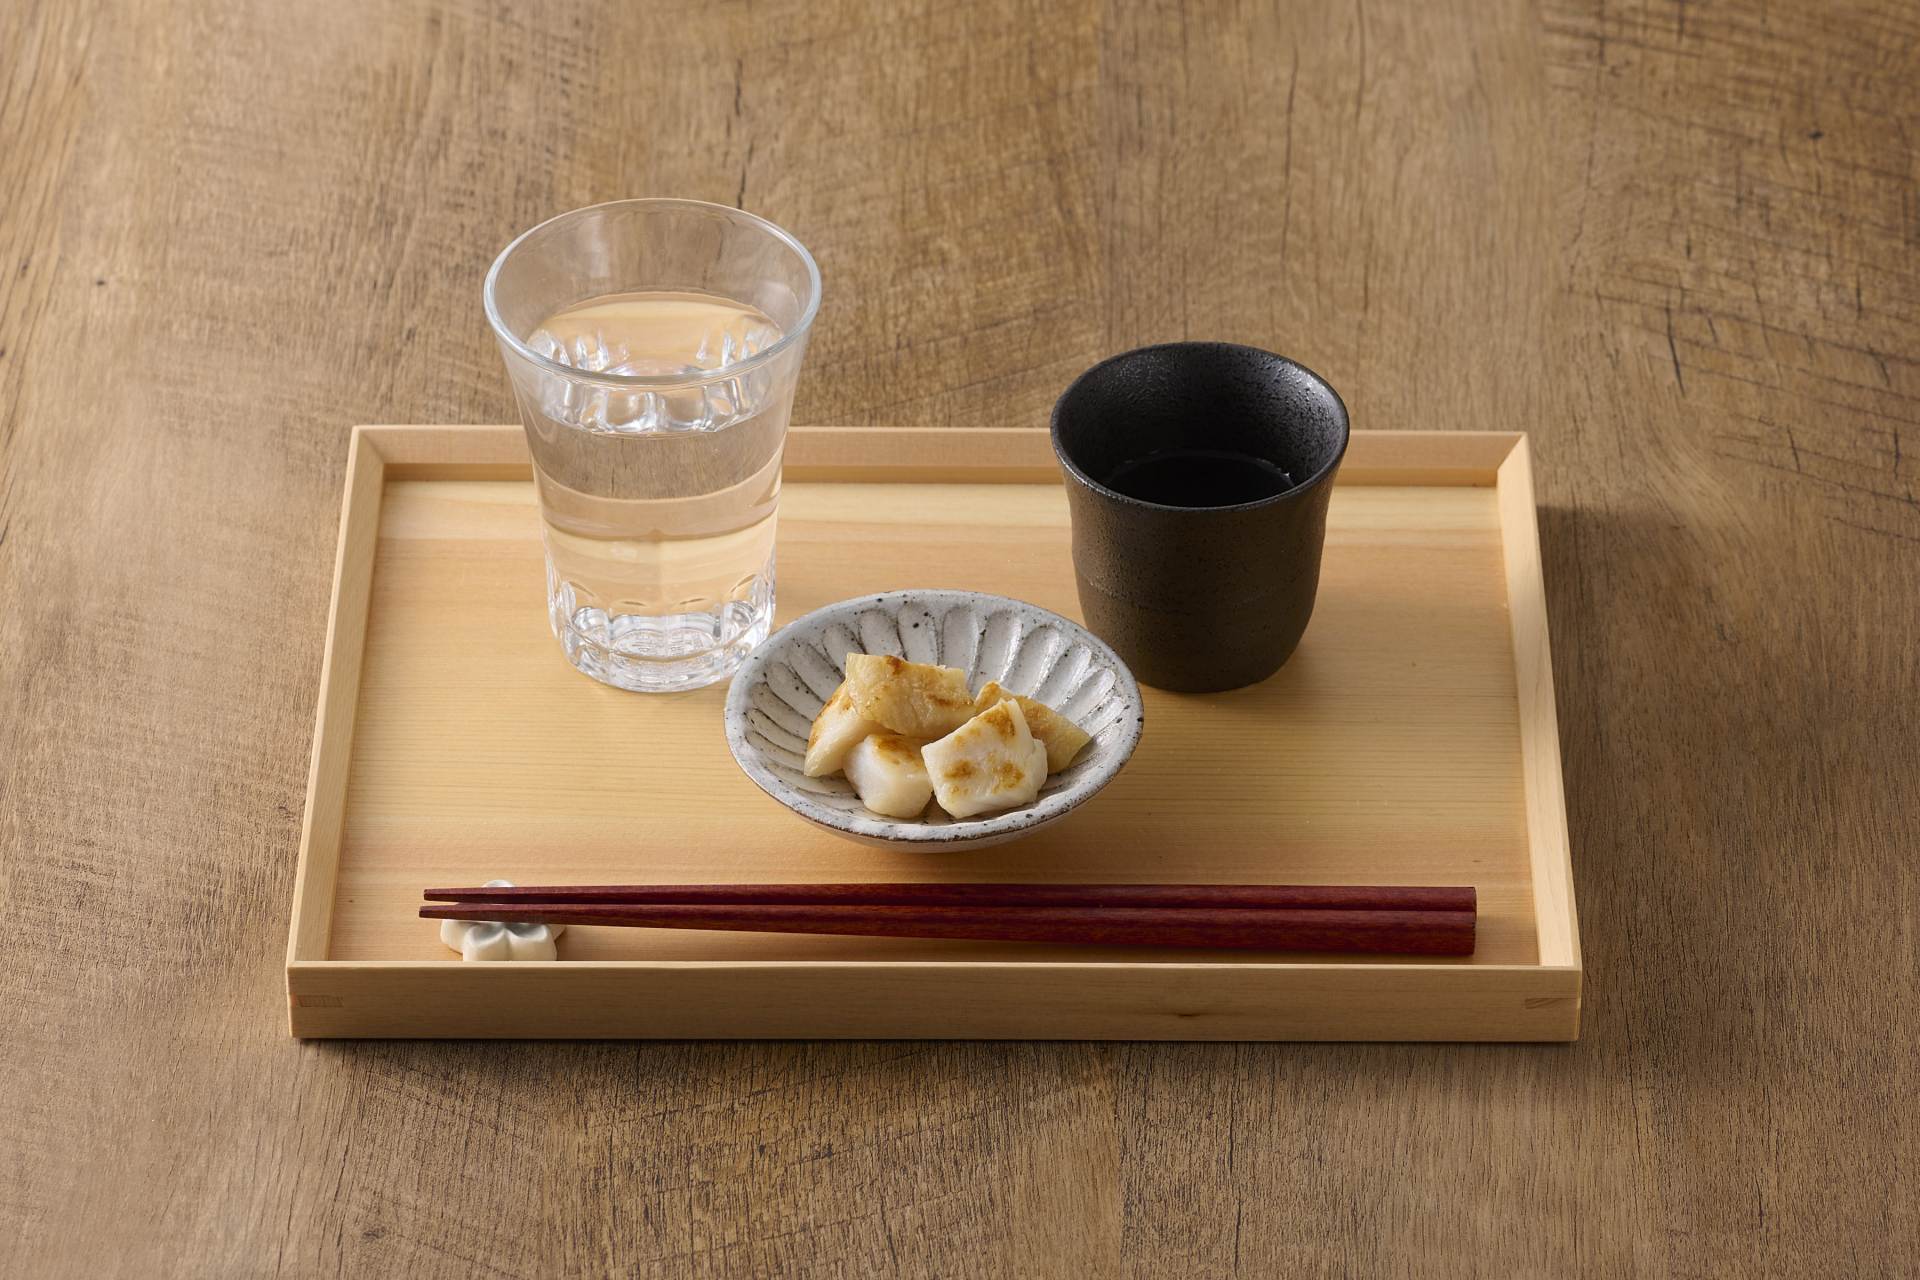 6 different sets on the menu try, ranging from the 400 yen trial set to the full-on feast set priced at 1,320 yen.